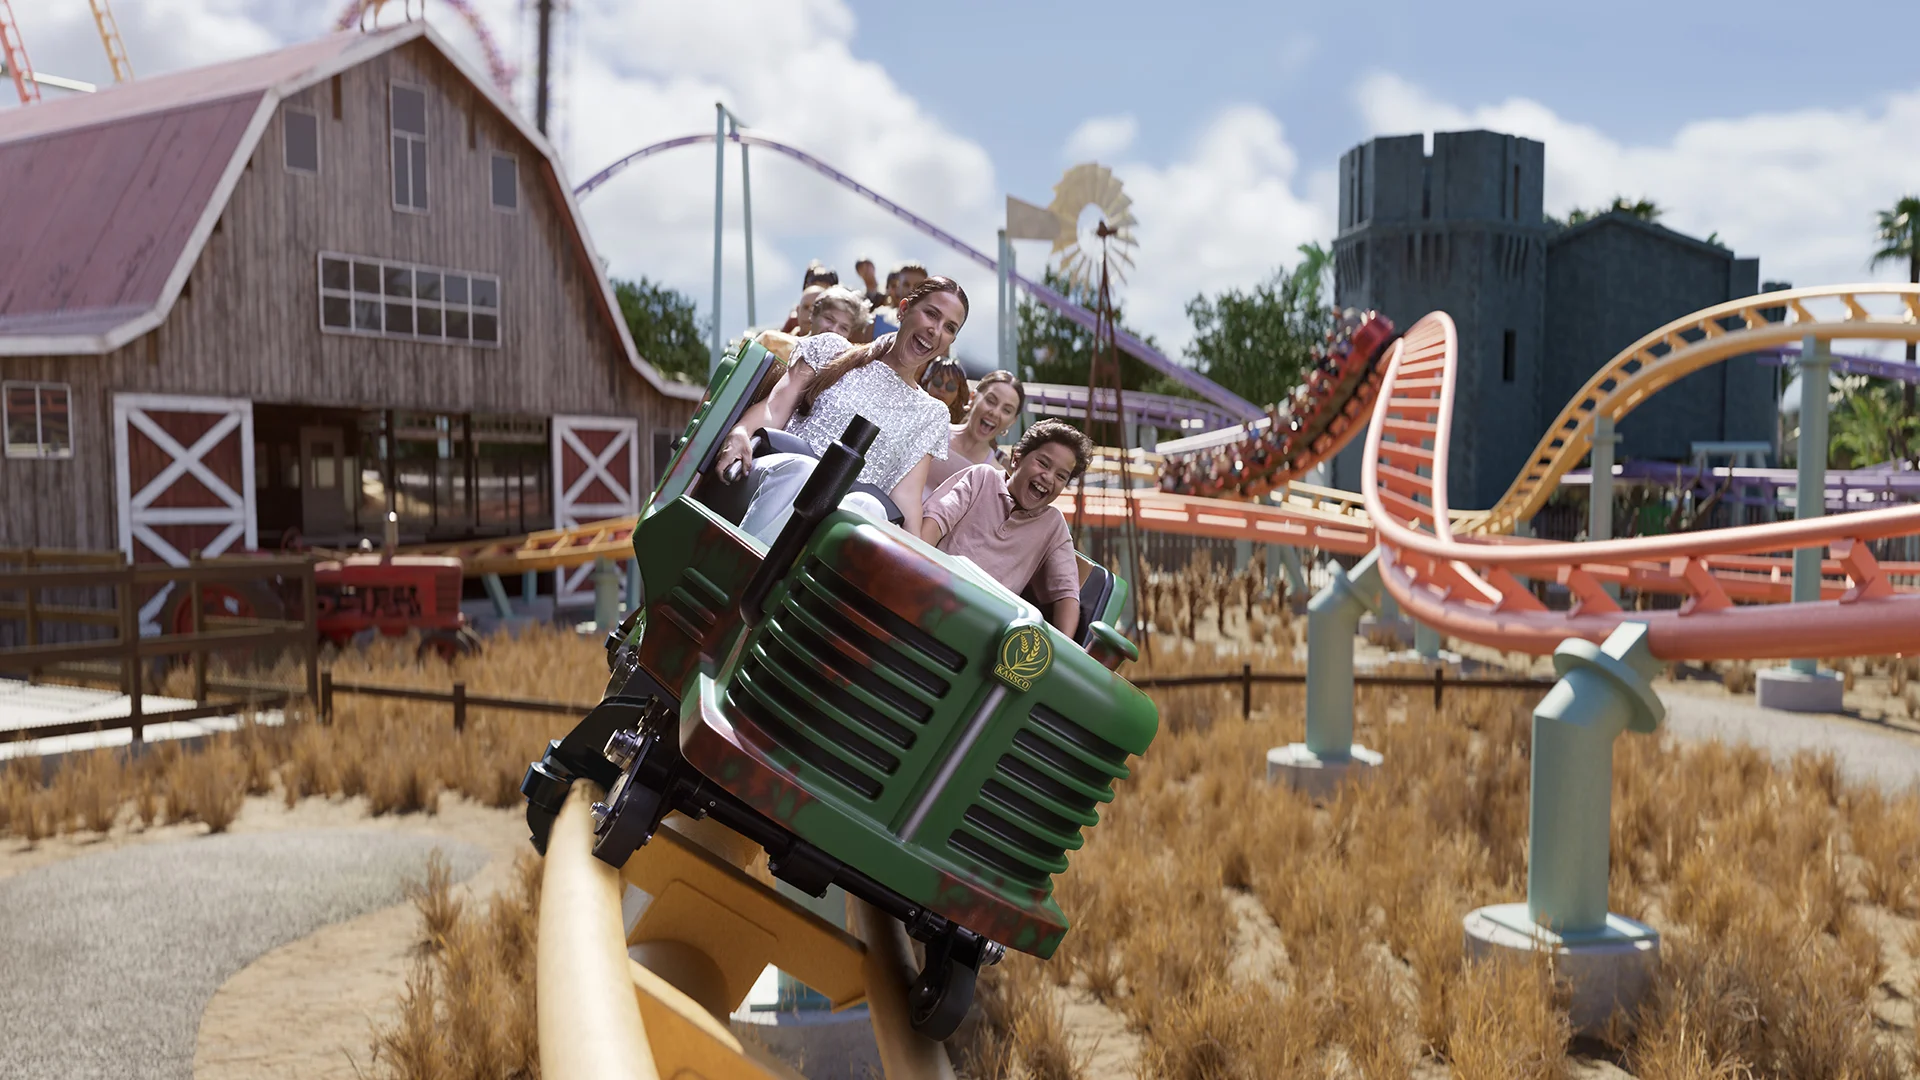 A family enjoying a thrilling ride on the Kansas Twister family ride at Warner Bros. Movie World, experiencing twists and turns in a fun and exciting atmosphere